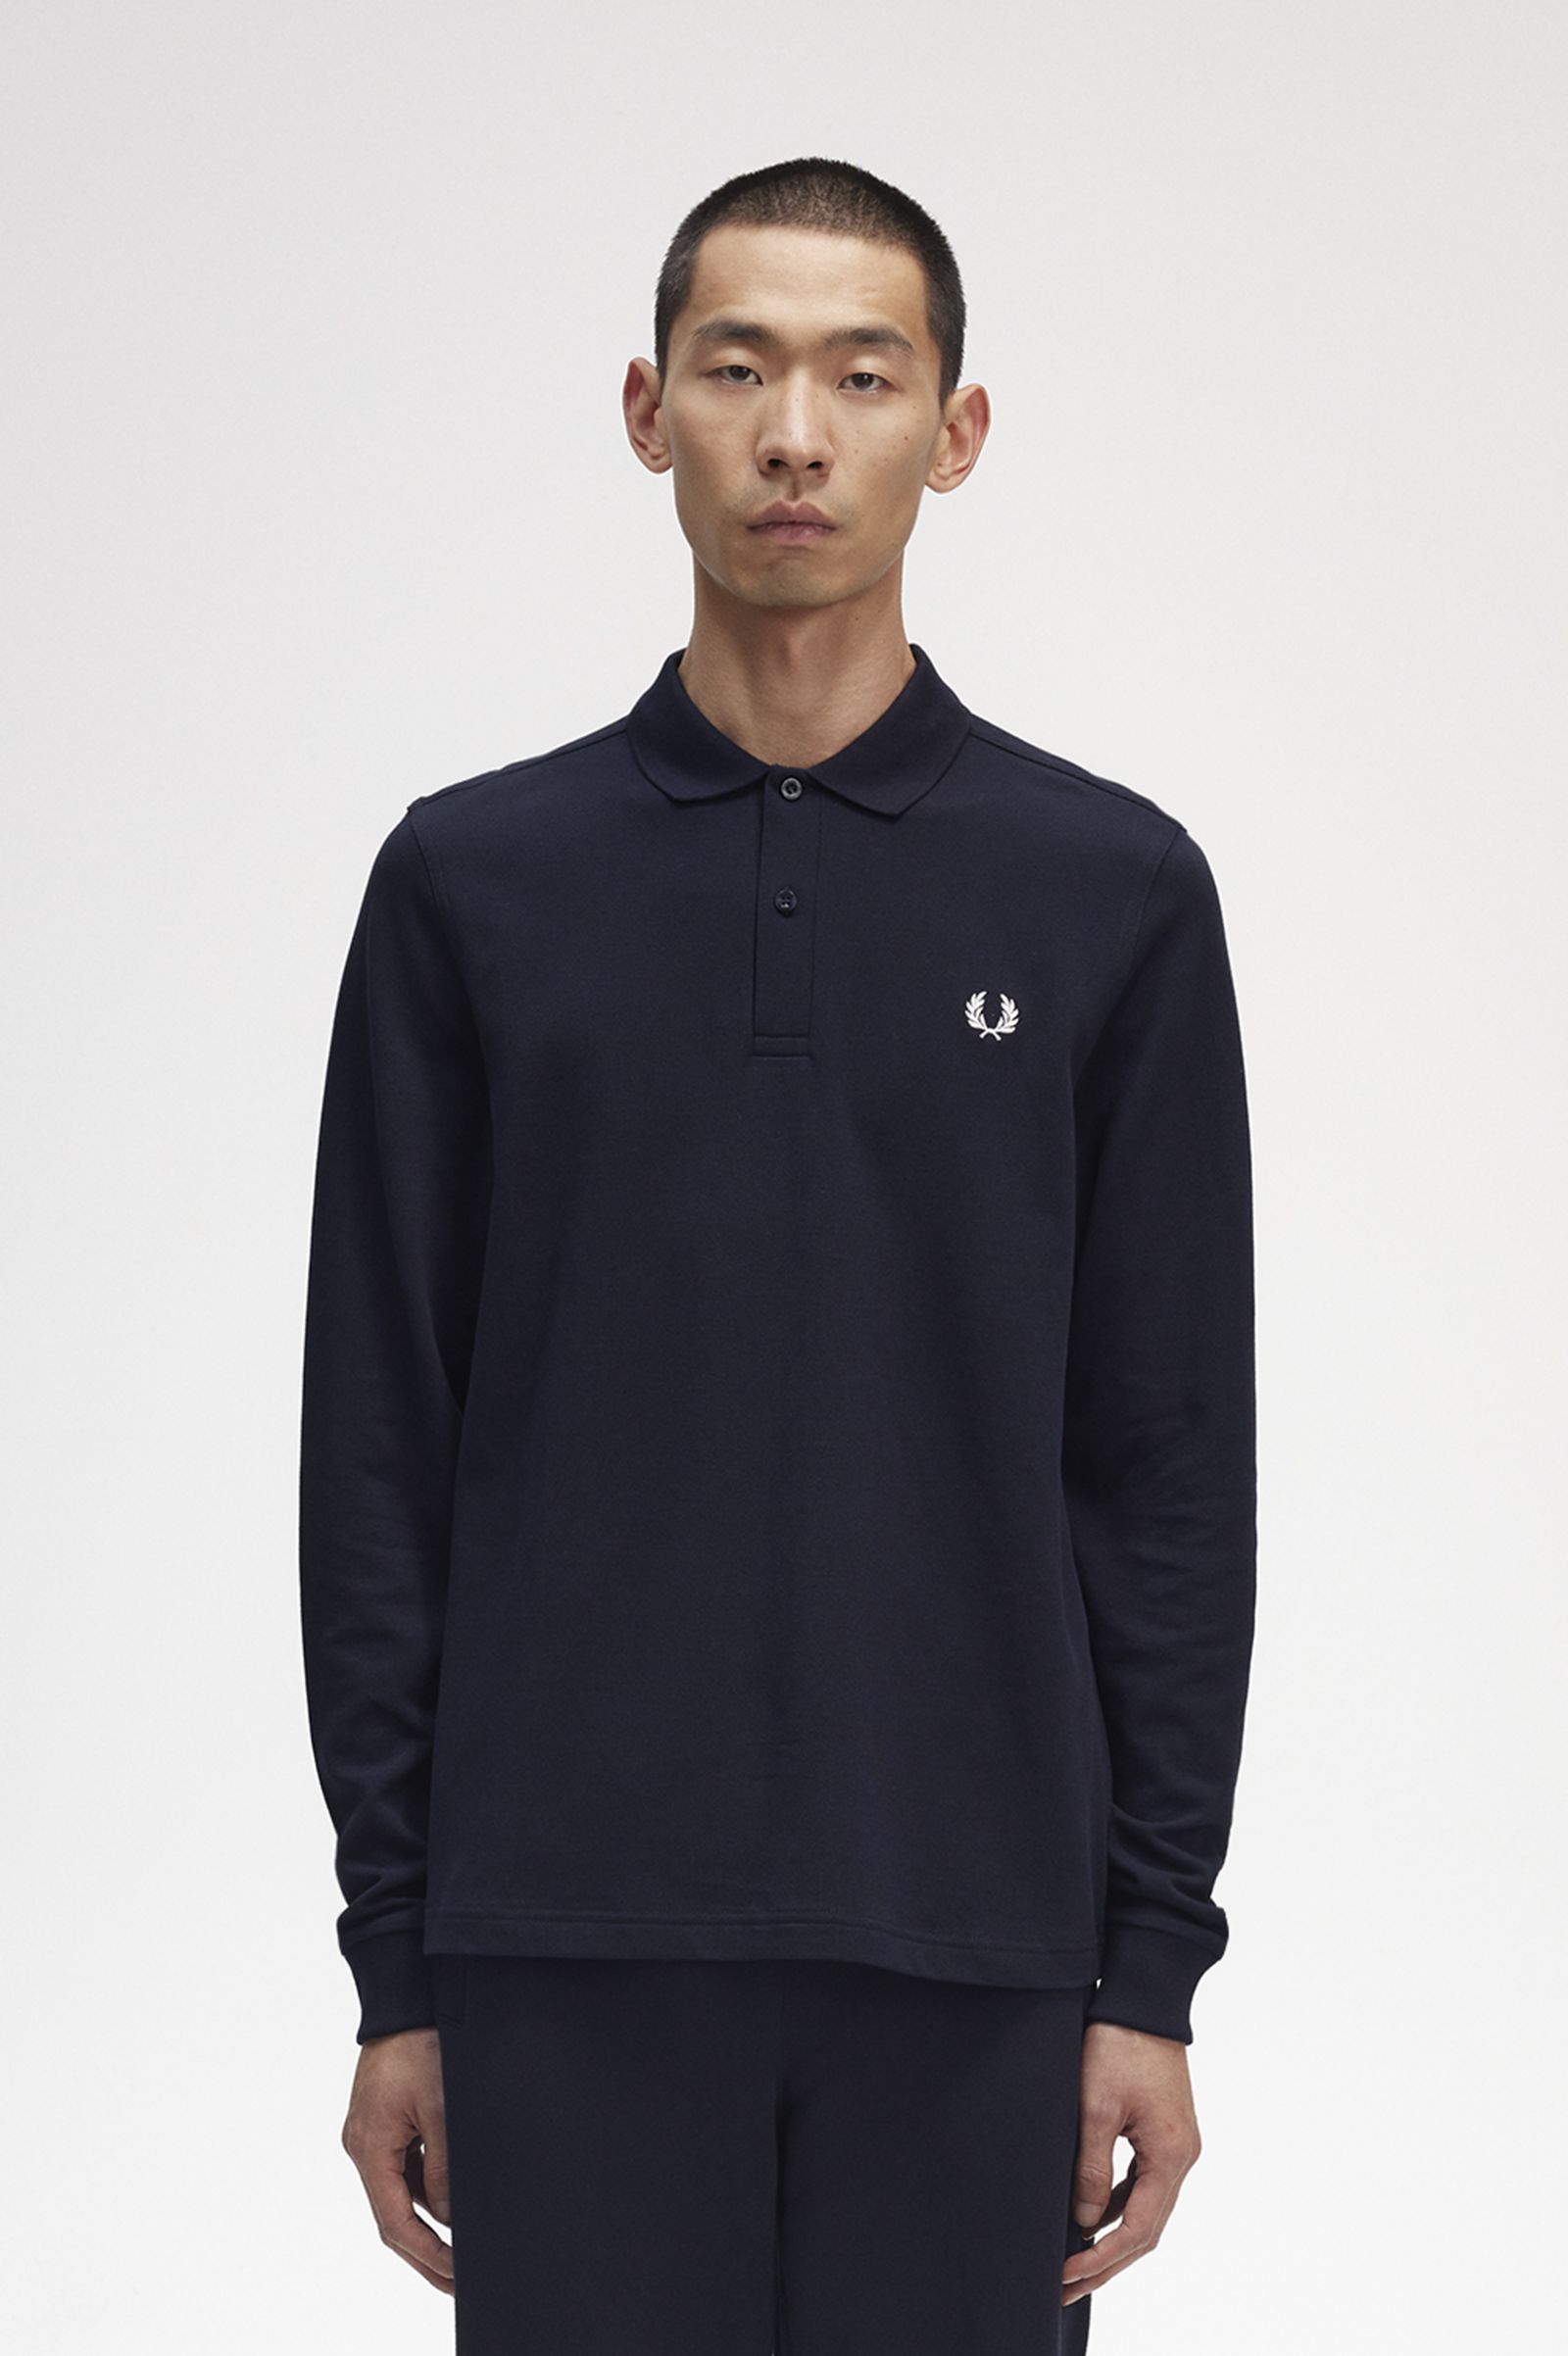 M6006 - Navy / White | The Fred Perry Shirt | Men's Short & Long